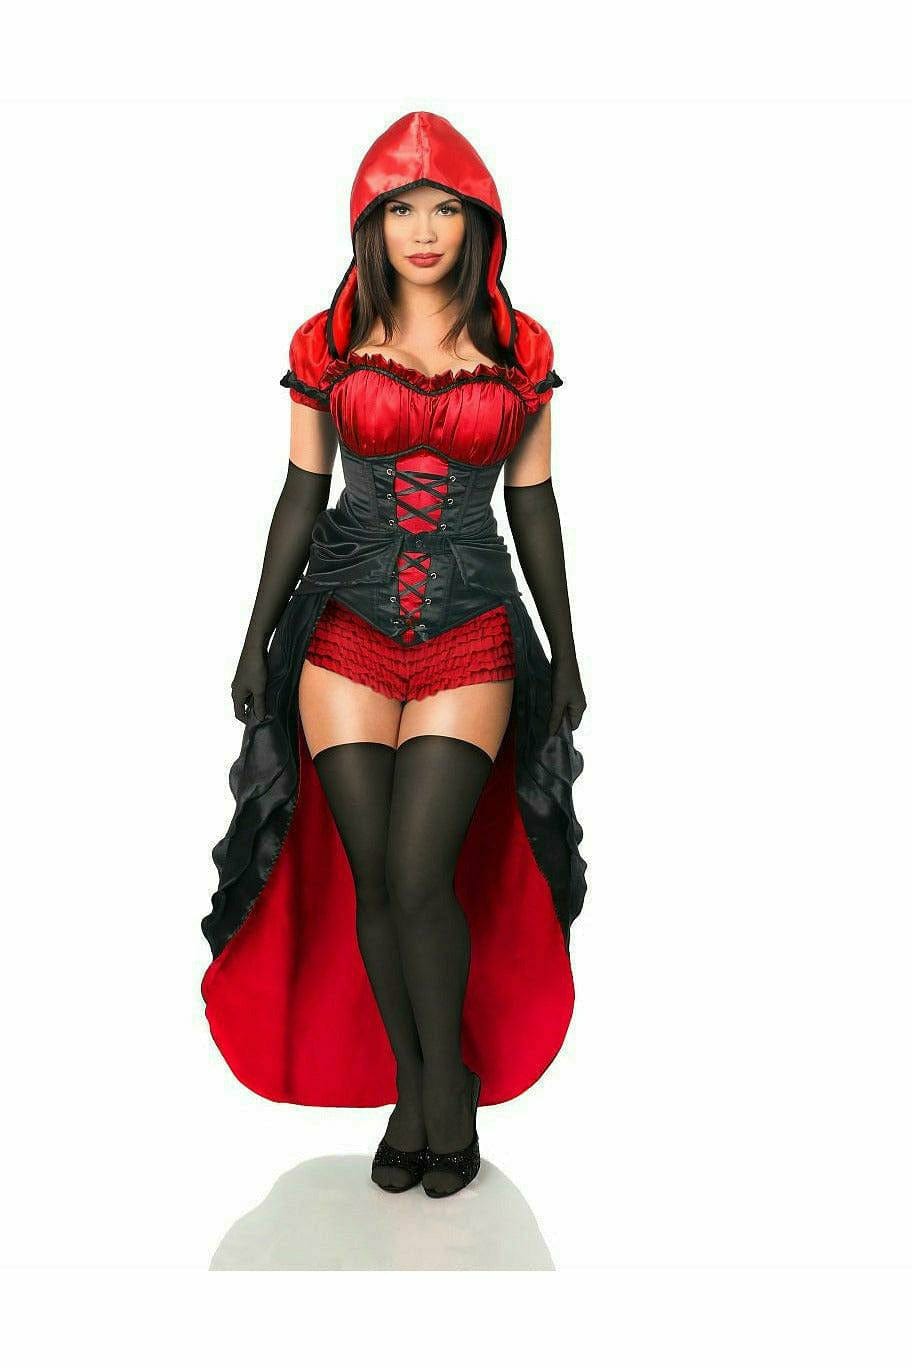 Deluxe Five Piece Red Hot Riding Hood Corset Costume Musotica.com